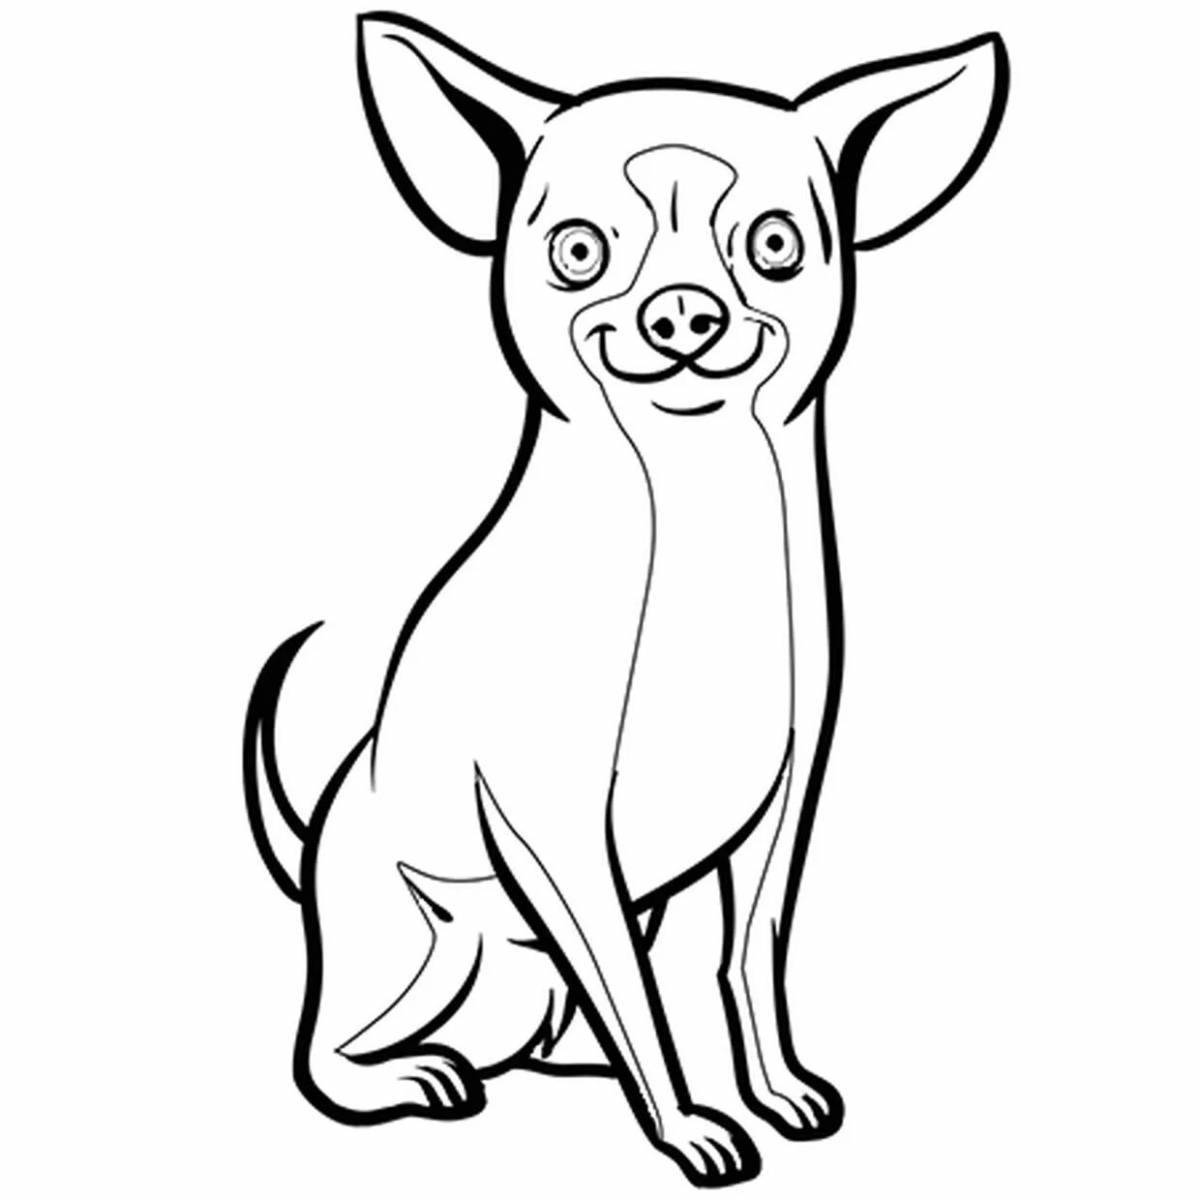 Colorful chihuahua coloring page for kids